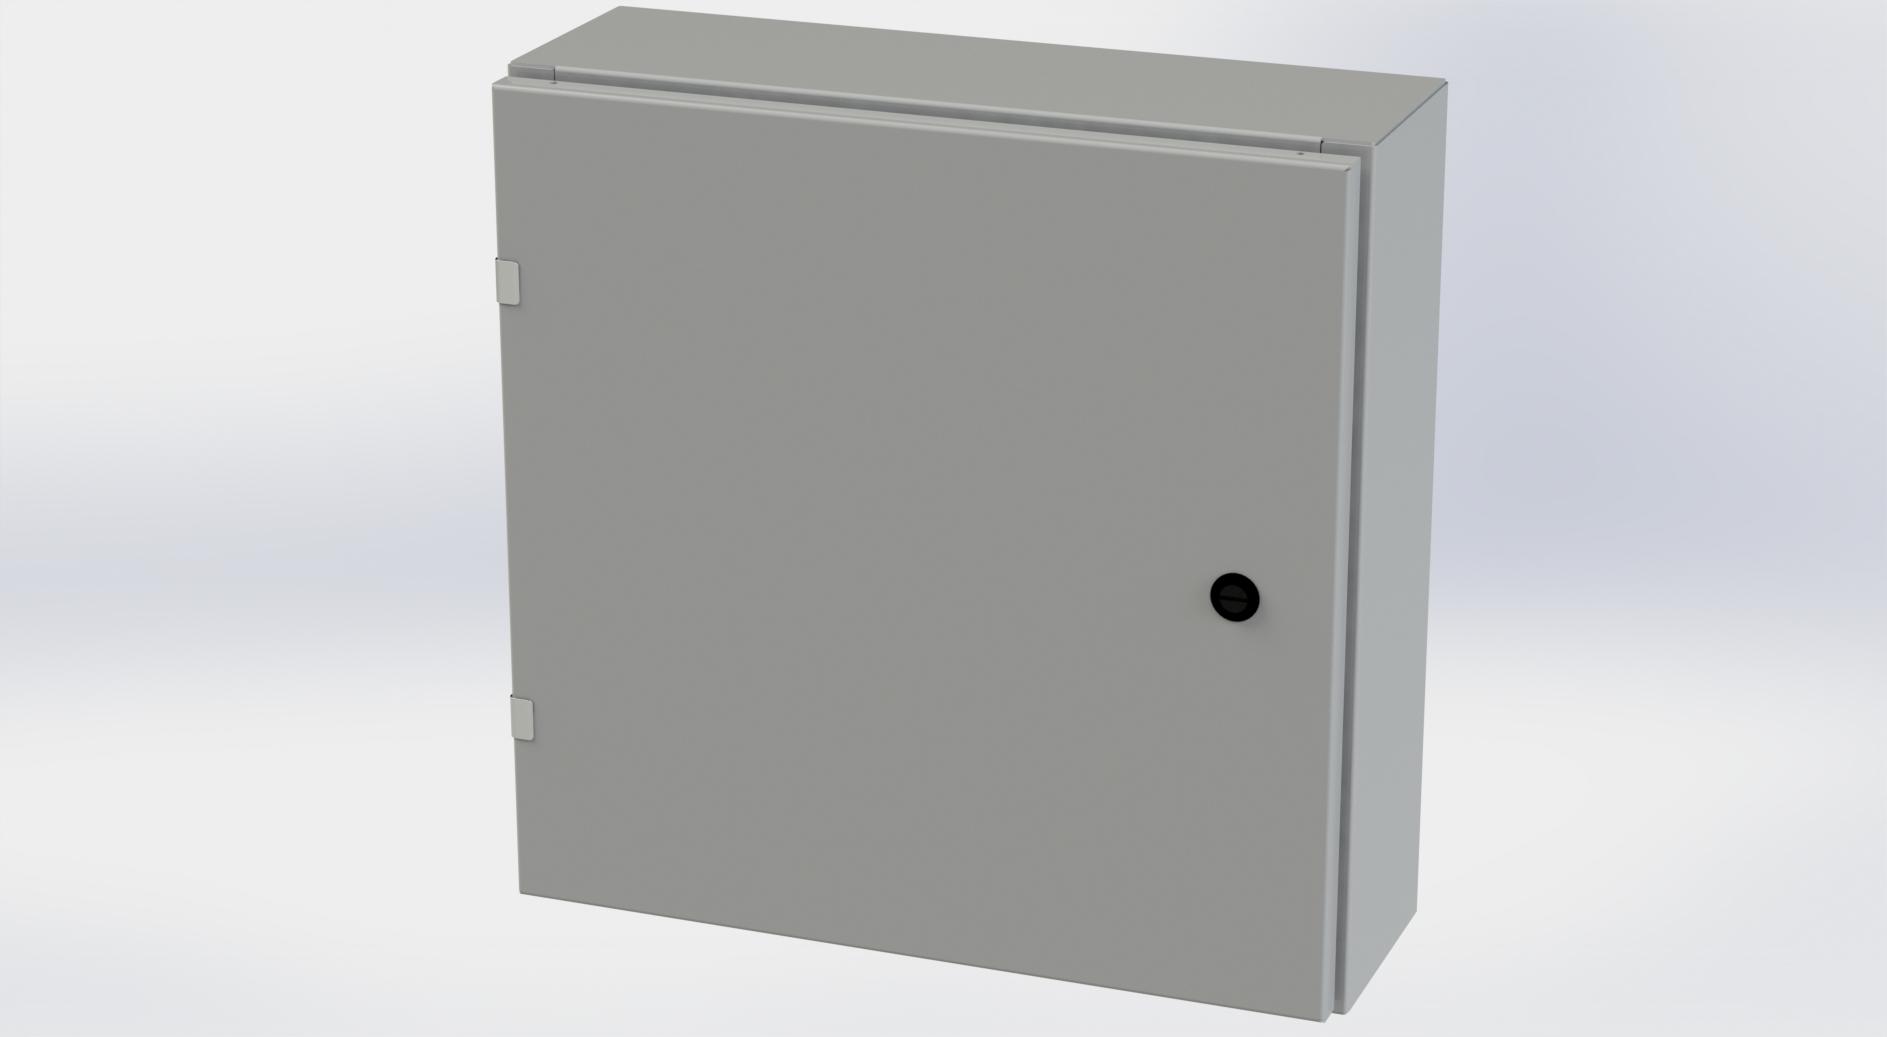 Saginaw Control SCE-20EL2006LP EL Enclosure, Height:20.00", Width:20.00", Depth:6.00", ANSI-61 gray powder coating inside and out. Optional sub-panels are powder coated white.